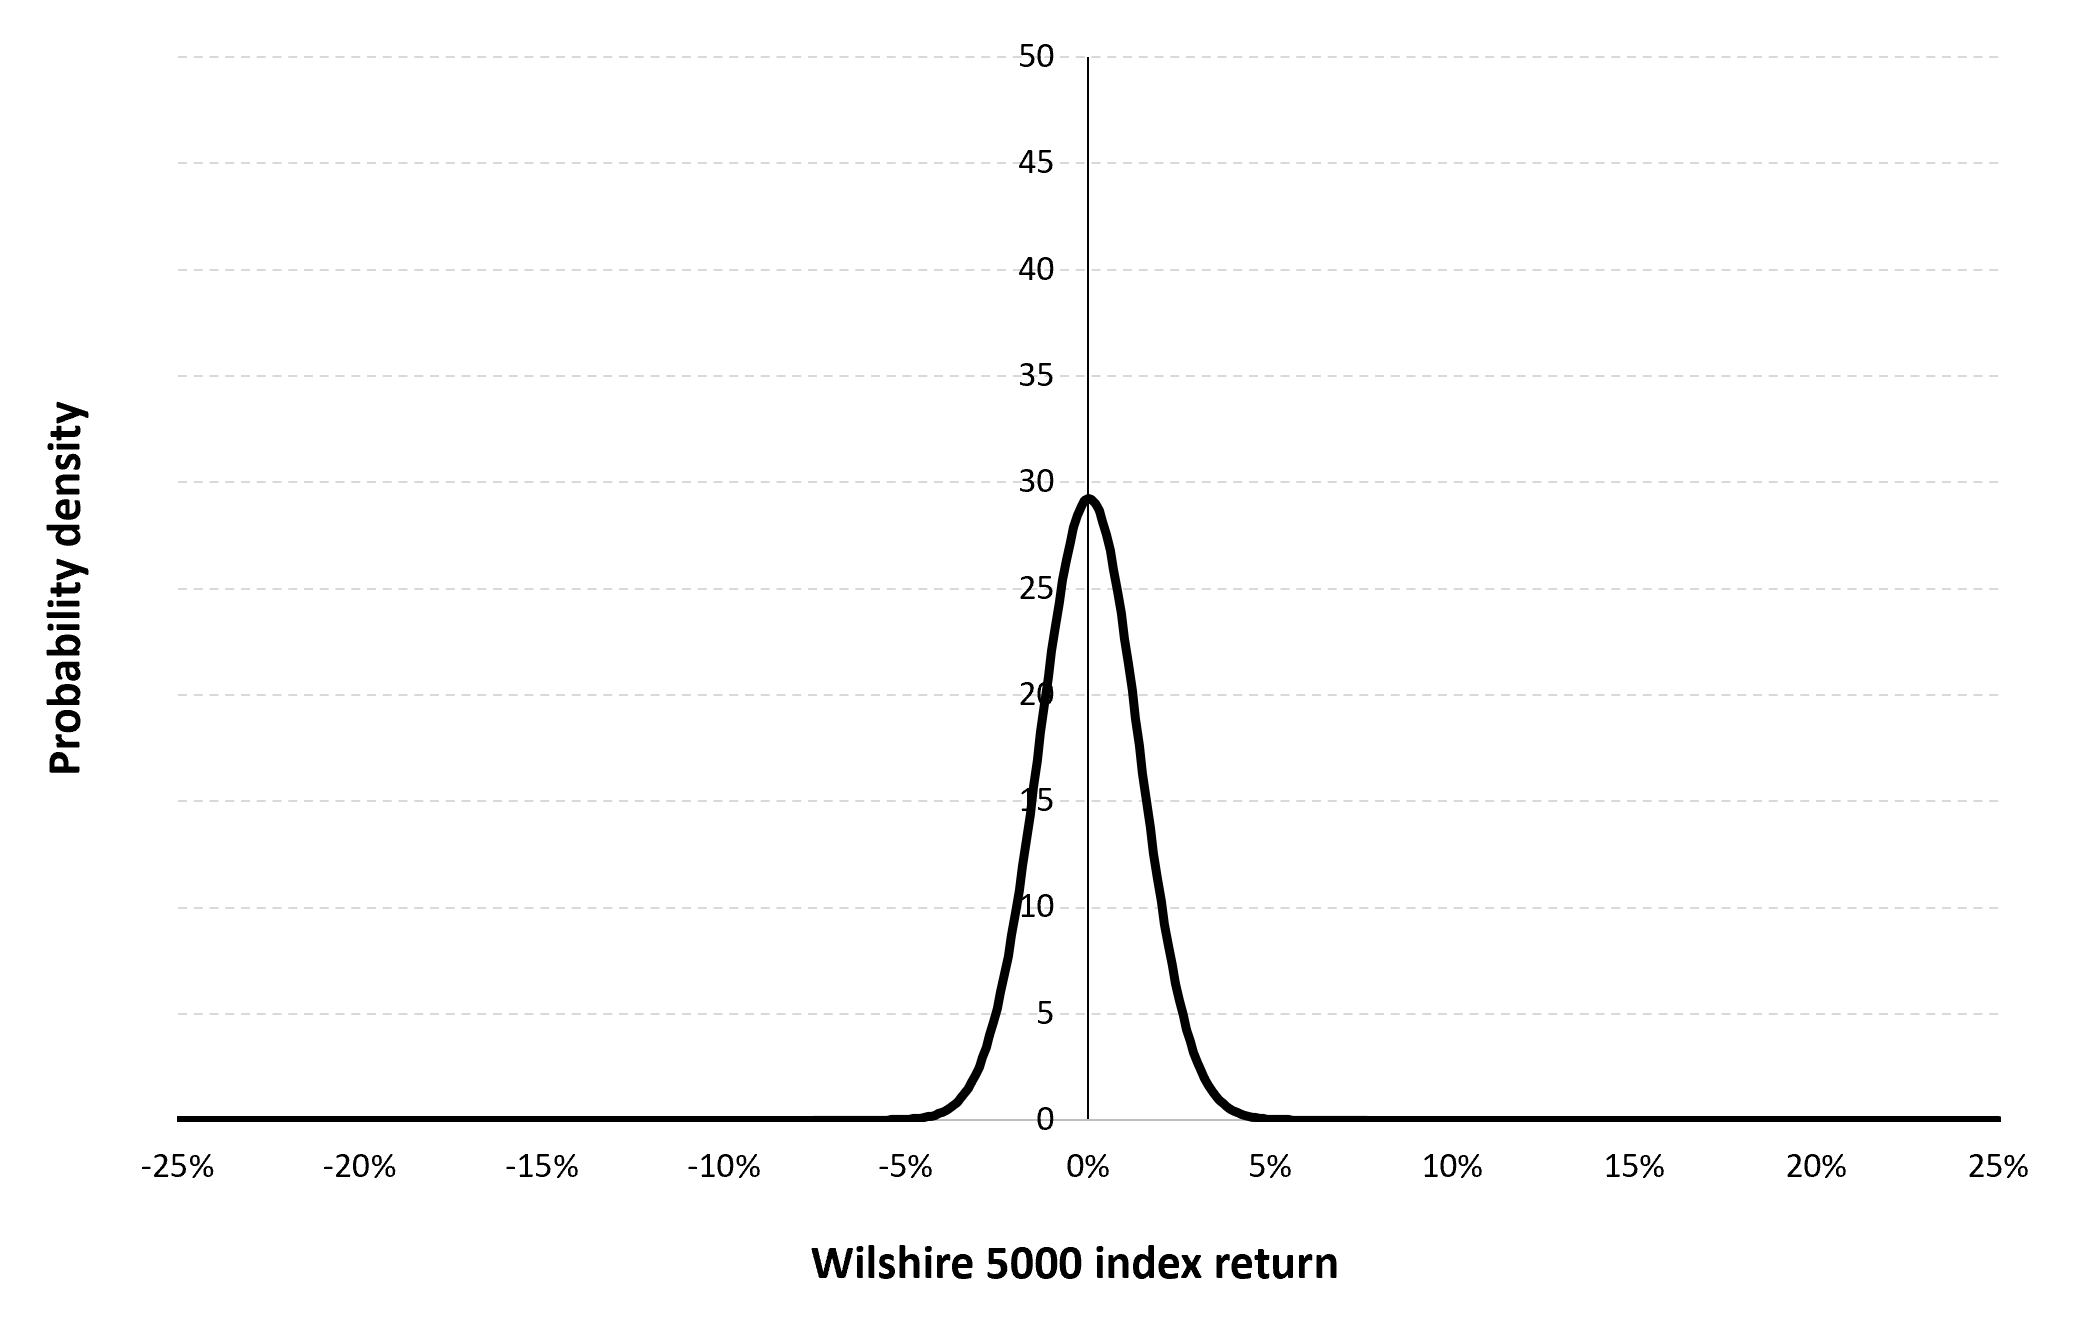 Gaussian distribution of the daily Wilshire 5000 index returns